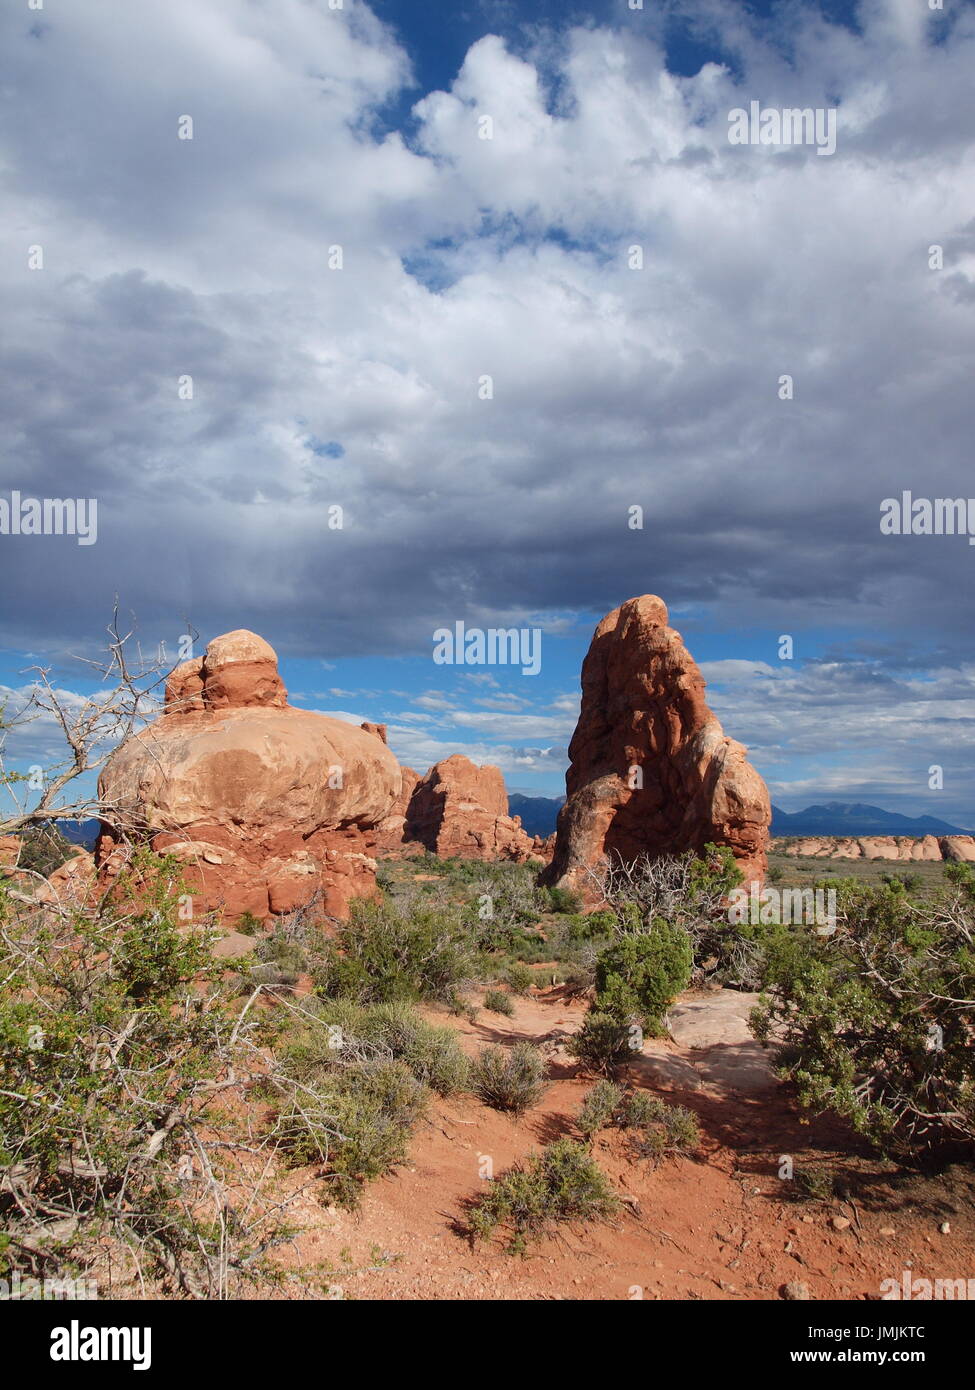 Pair of Red Rock Formations under Storm Clouds in High Desert Stock Photo